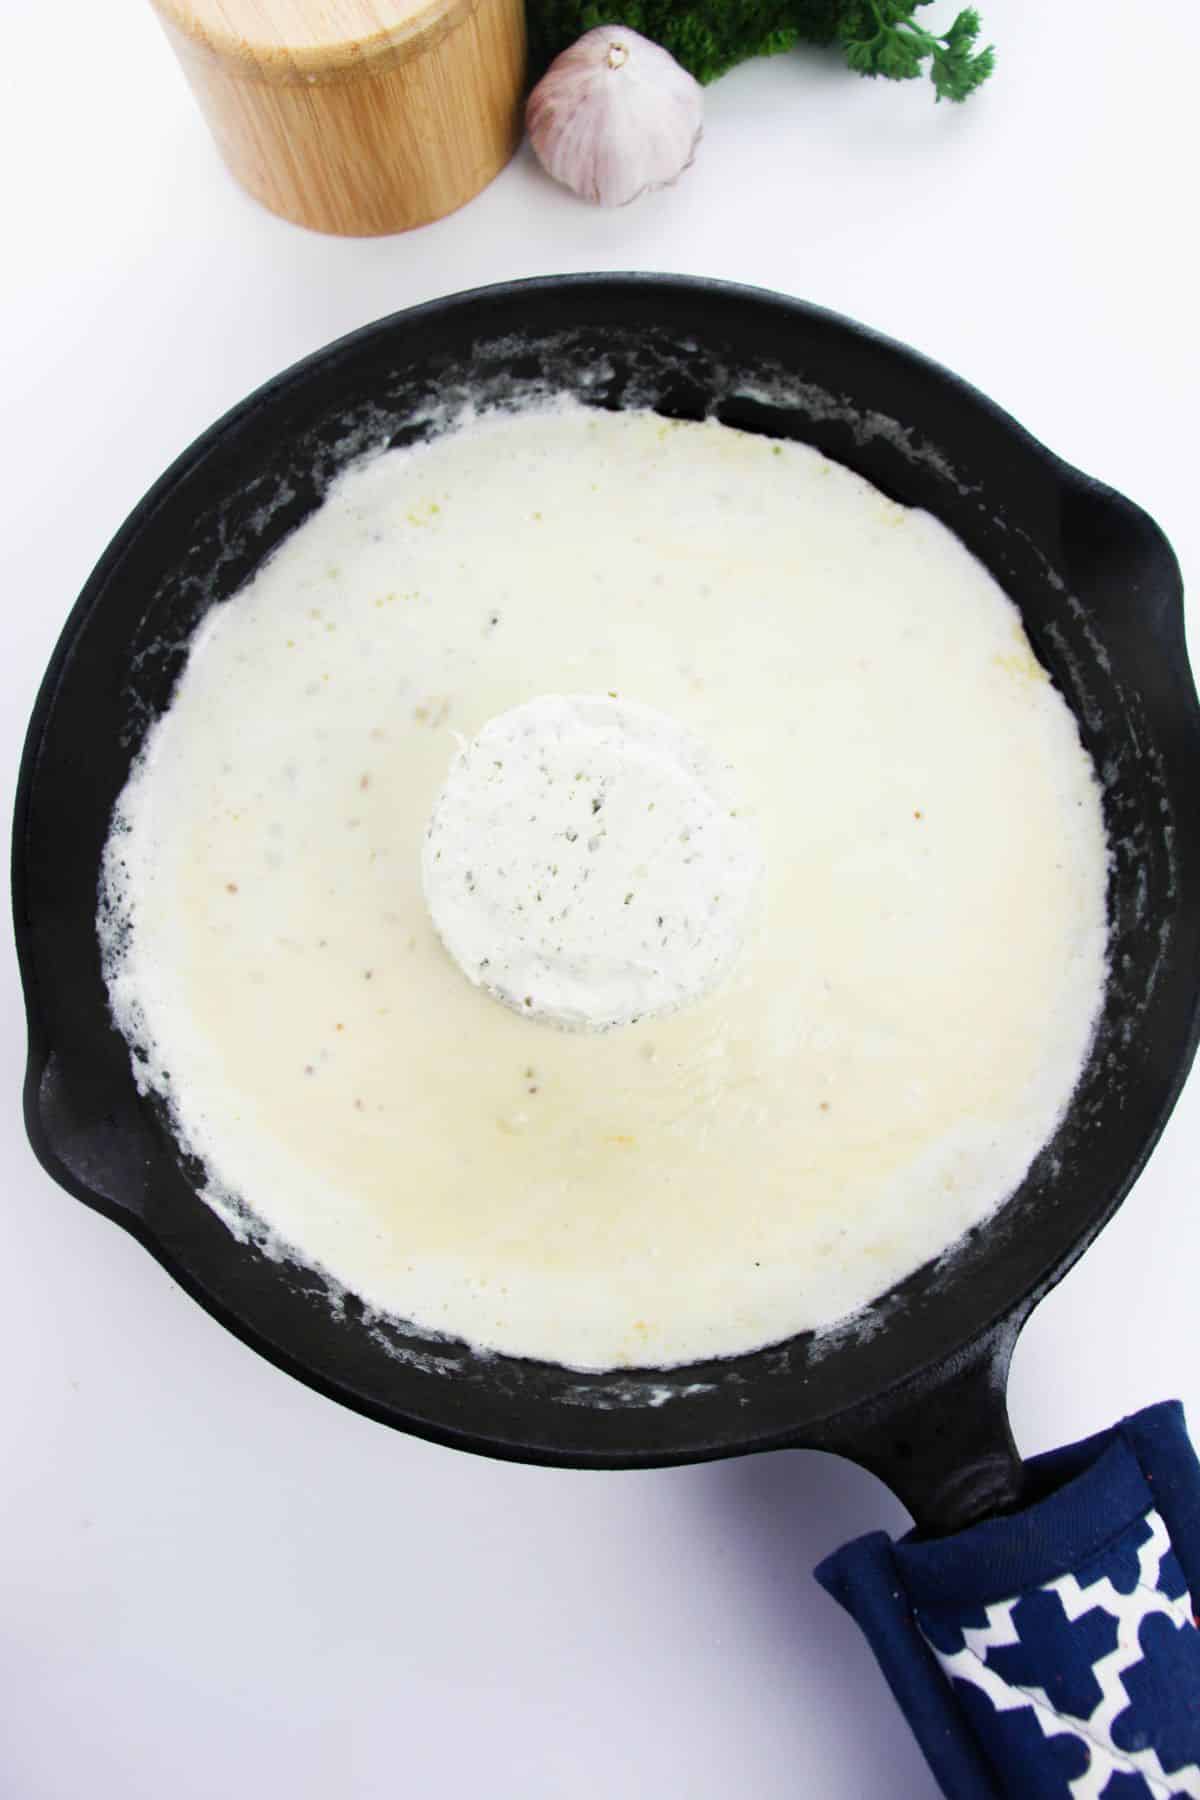 Boursin cheese is stirred into the skillet.